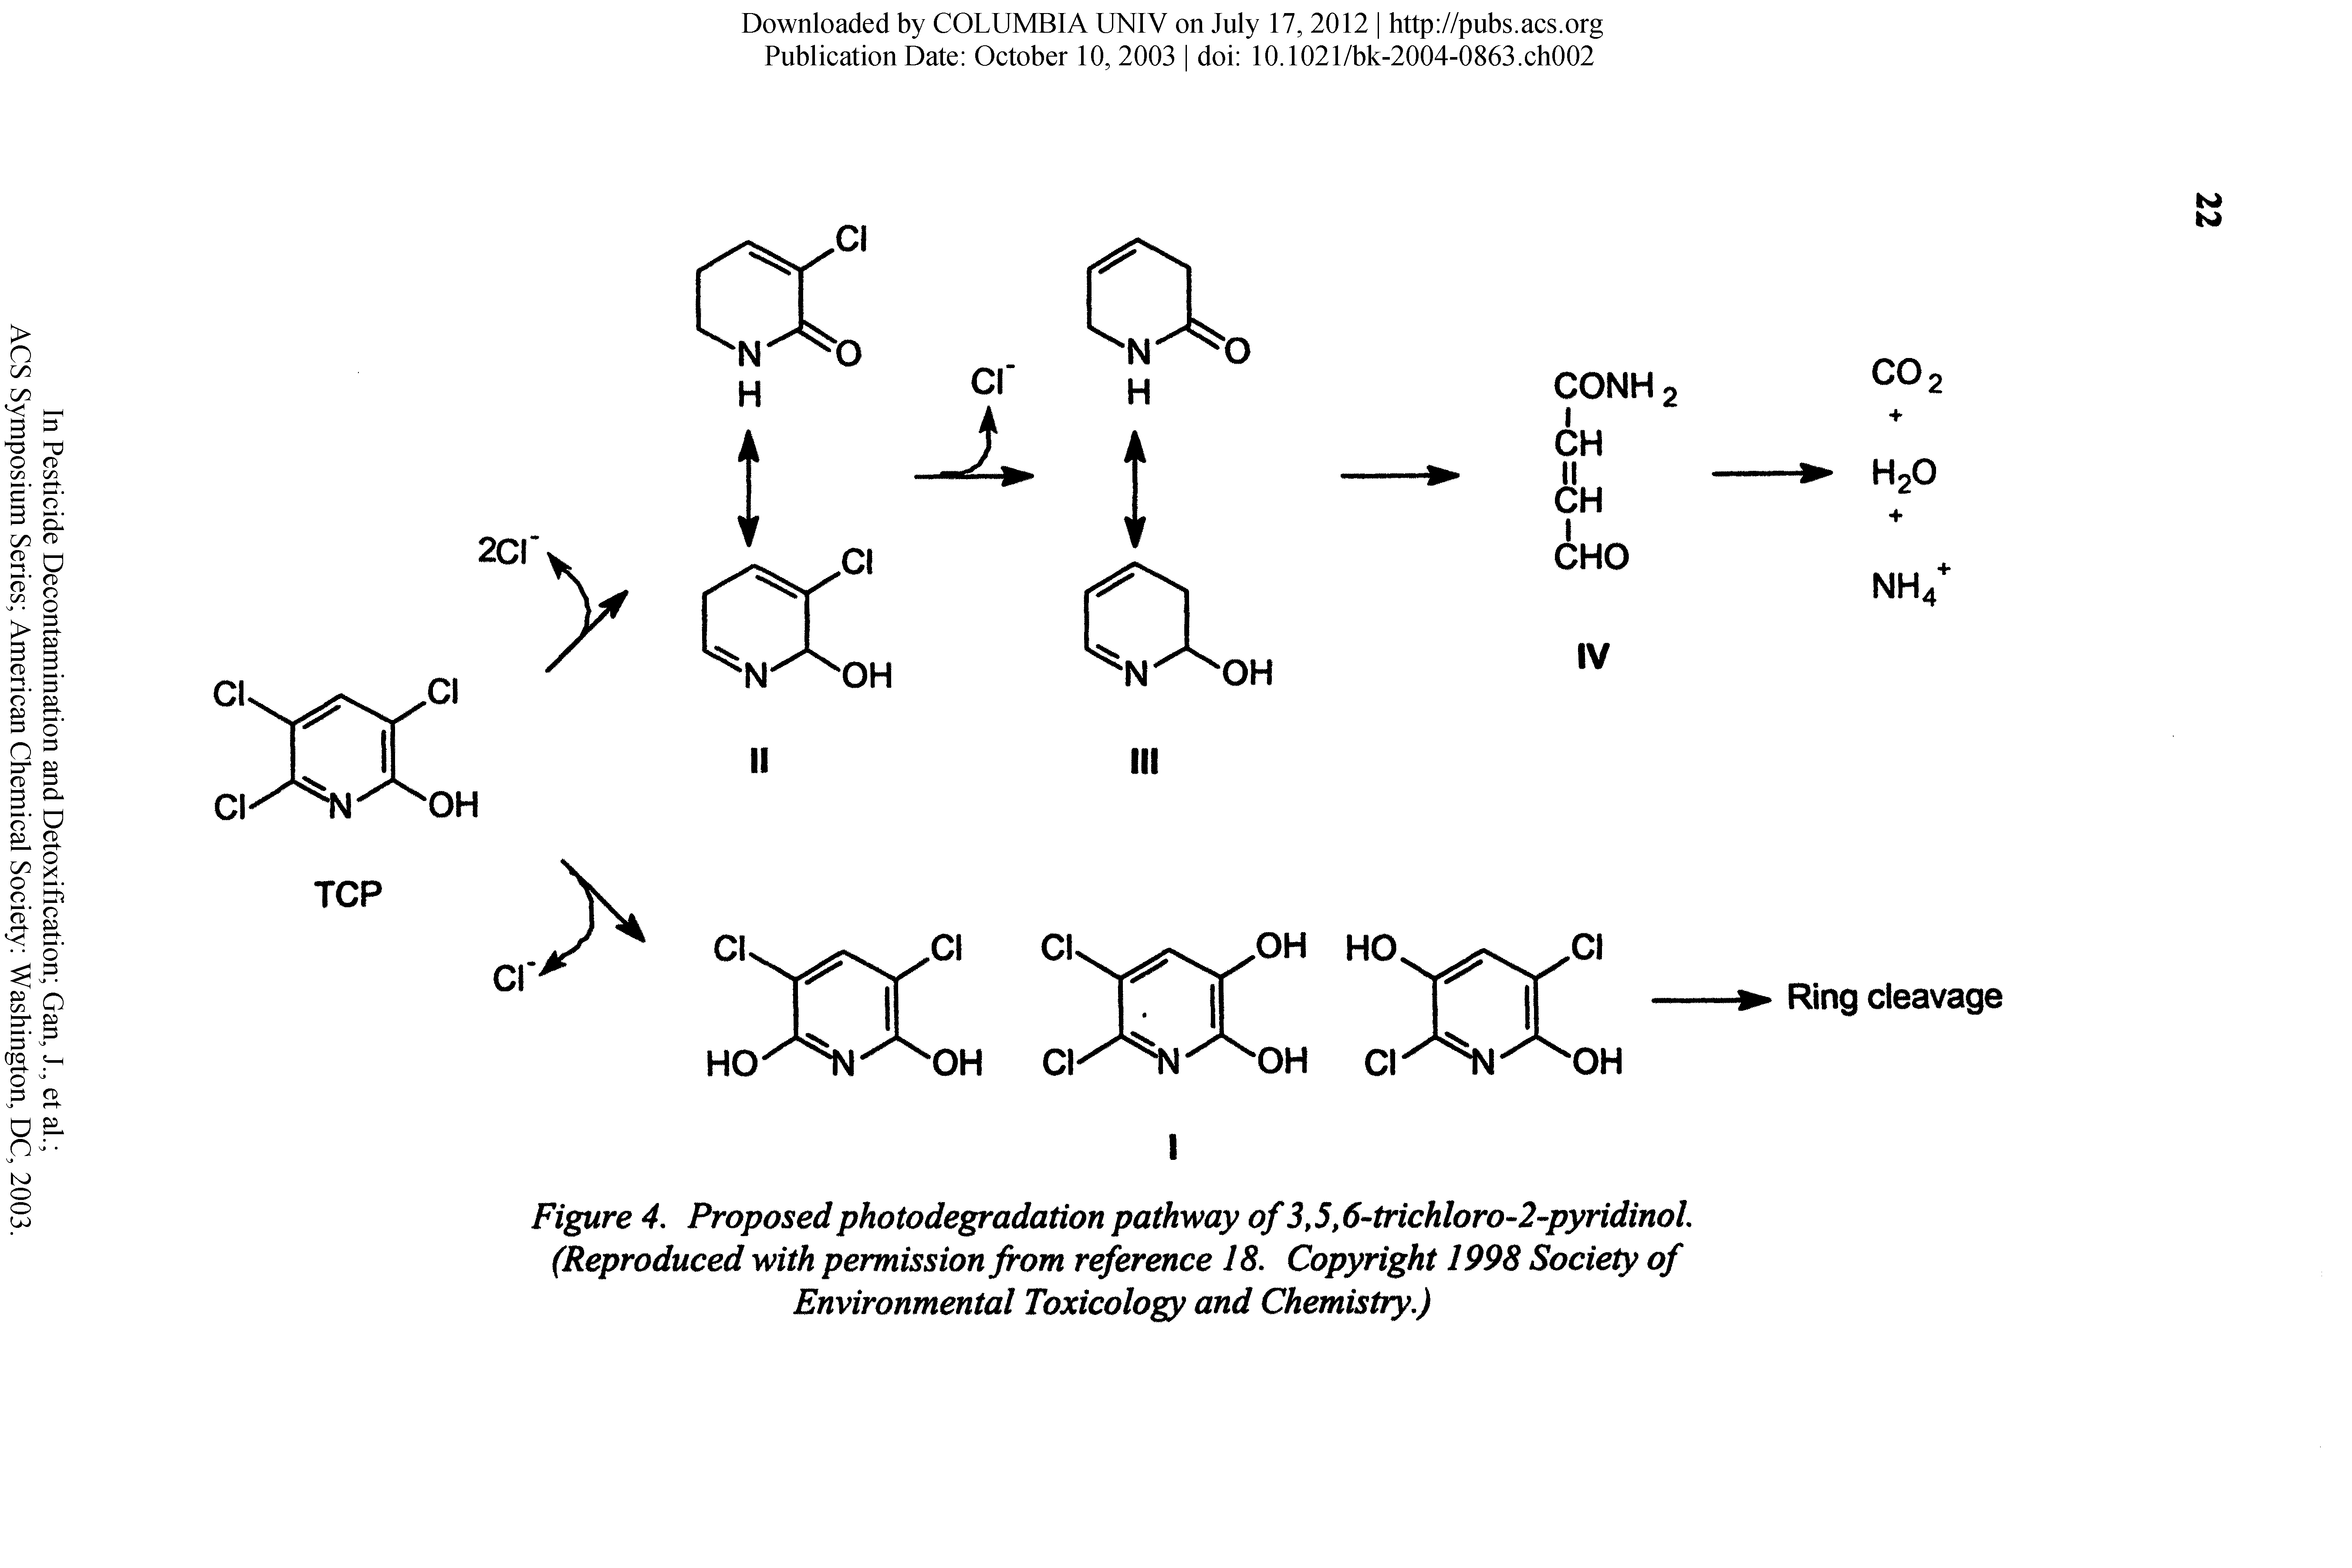 Figure 4. Proposed photodegradation pathway of 3,5,6-trichloro-2-pyridinol. (Reproduced with permission from reference 18, Copyright 1998 Society of Environmental Toxicology and Chemistry.)...